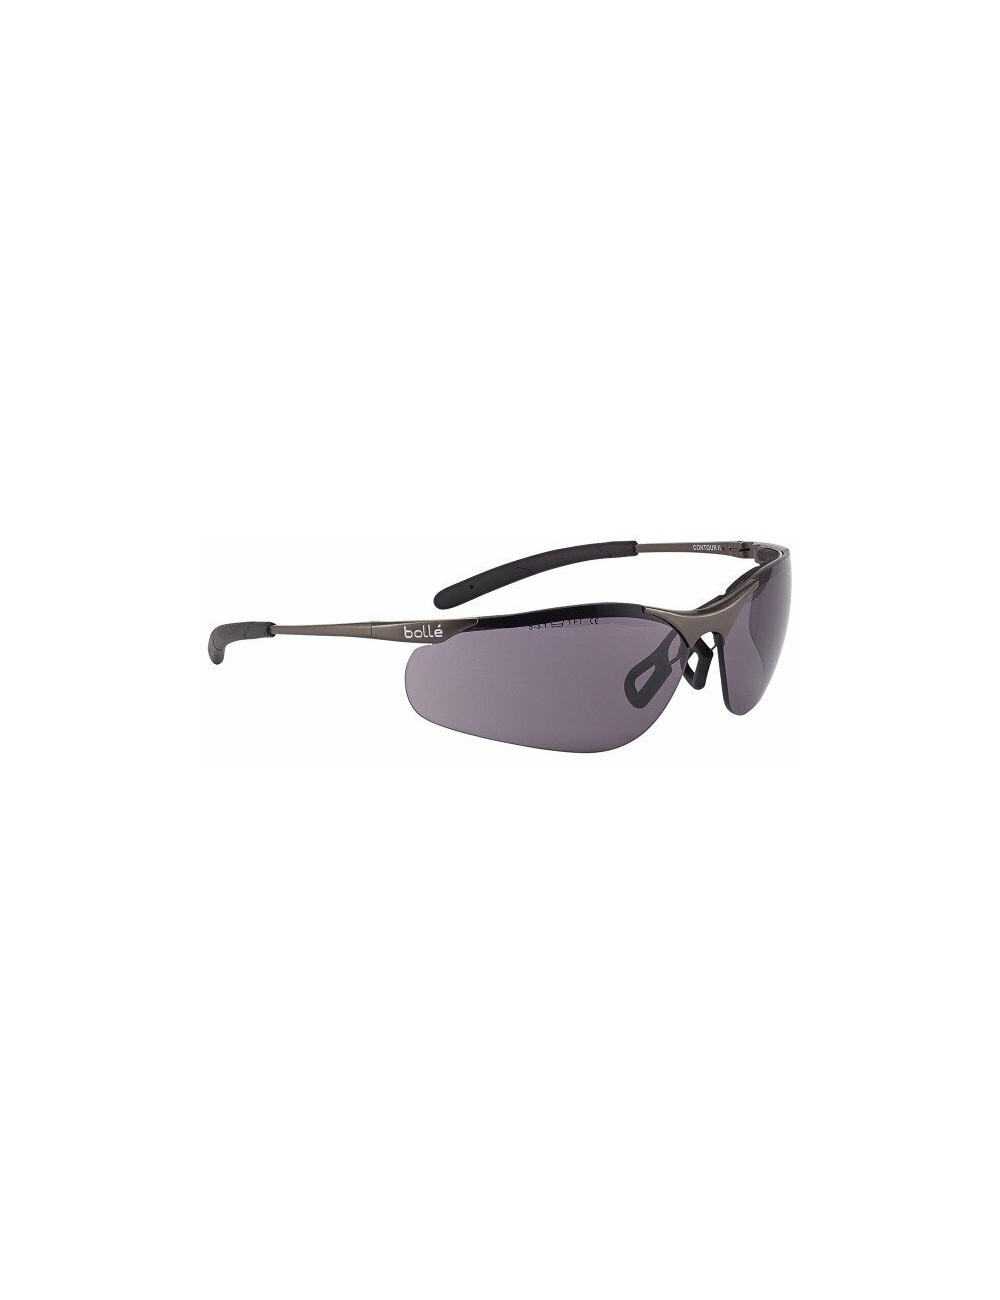 Bolle Contour Metal safety glasses